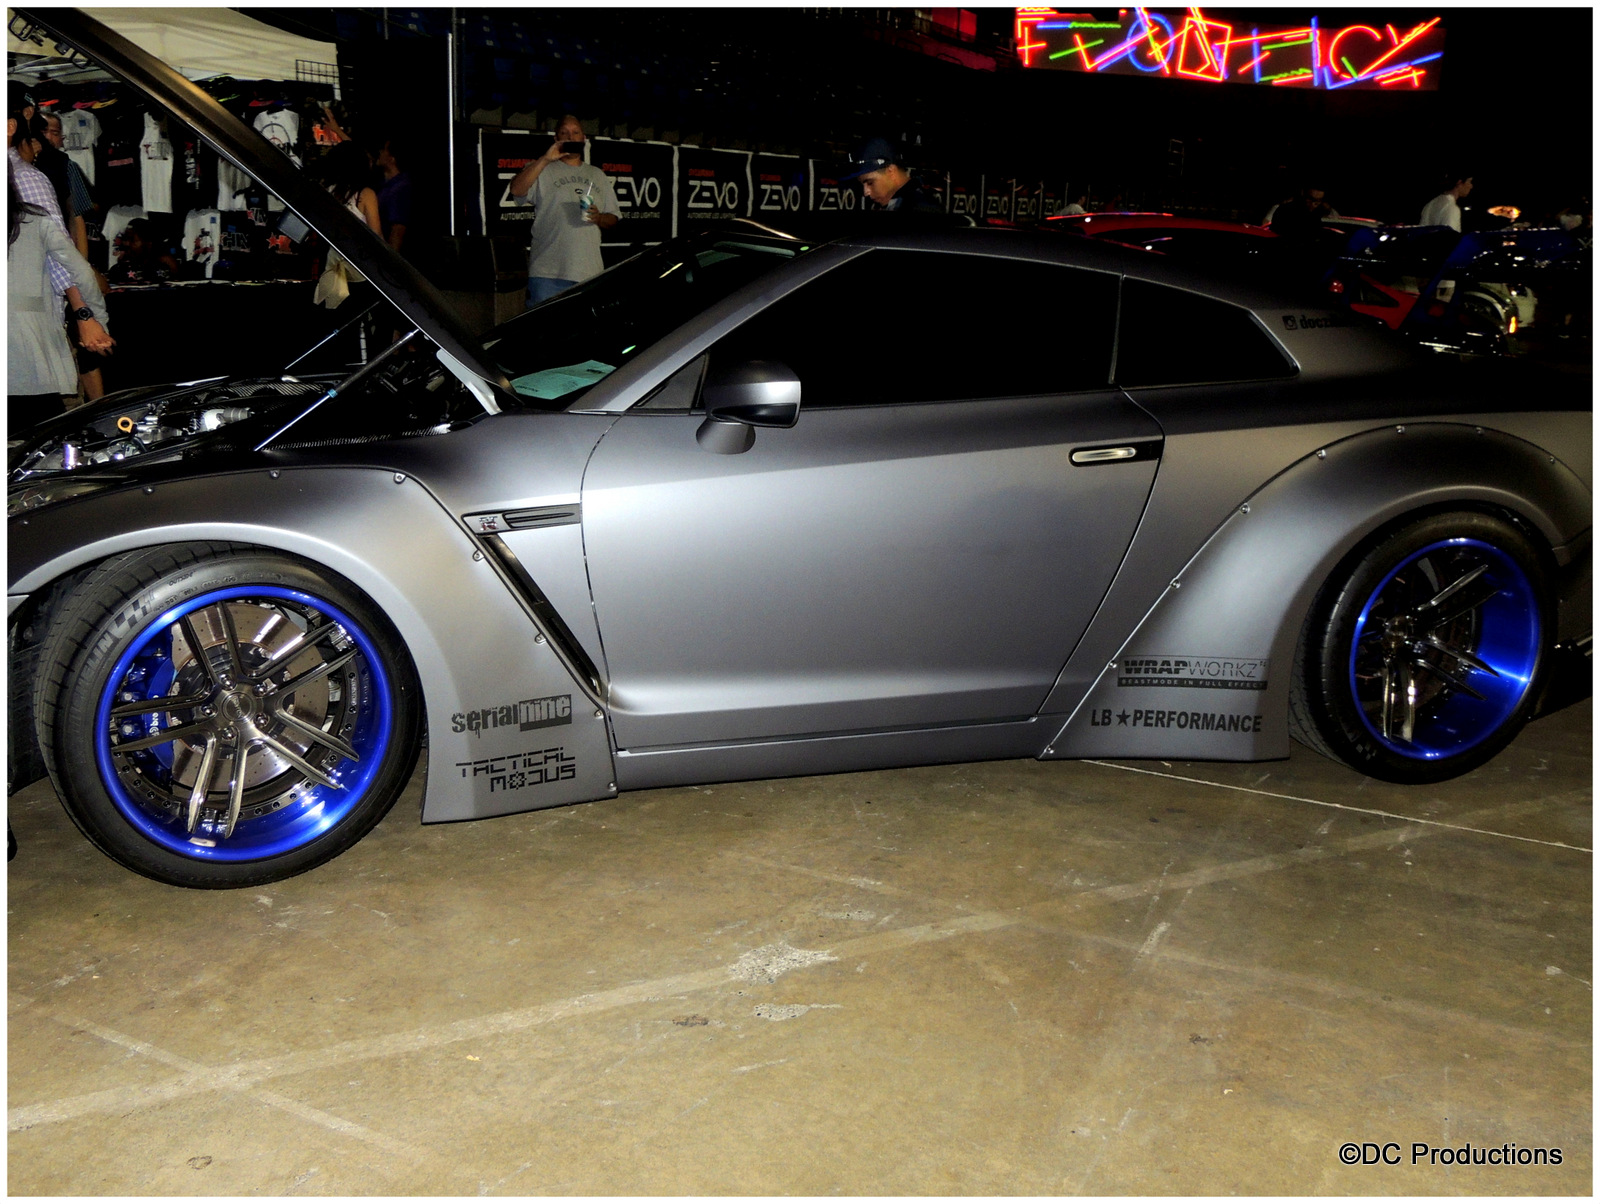 Channel A TV Covers Hot Import Nights Seattle